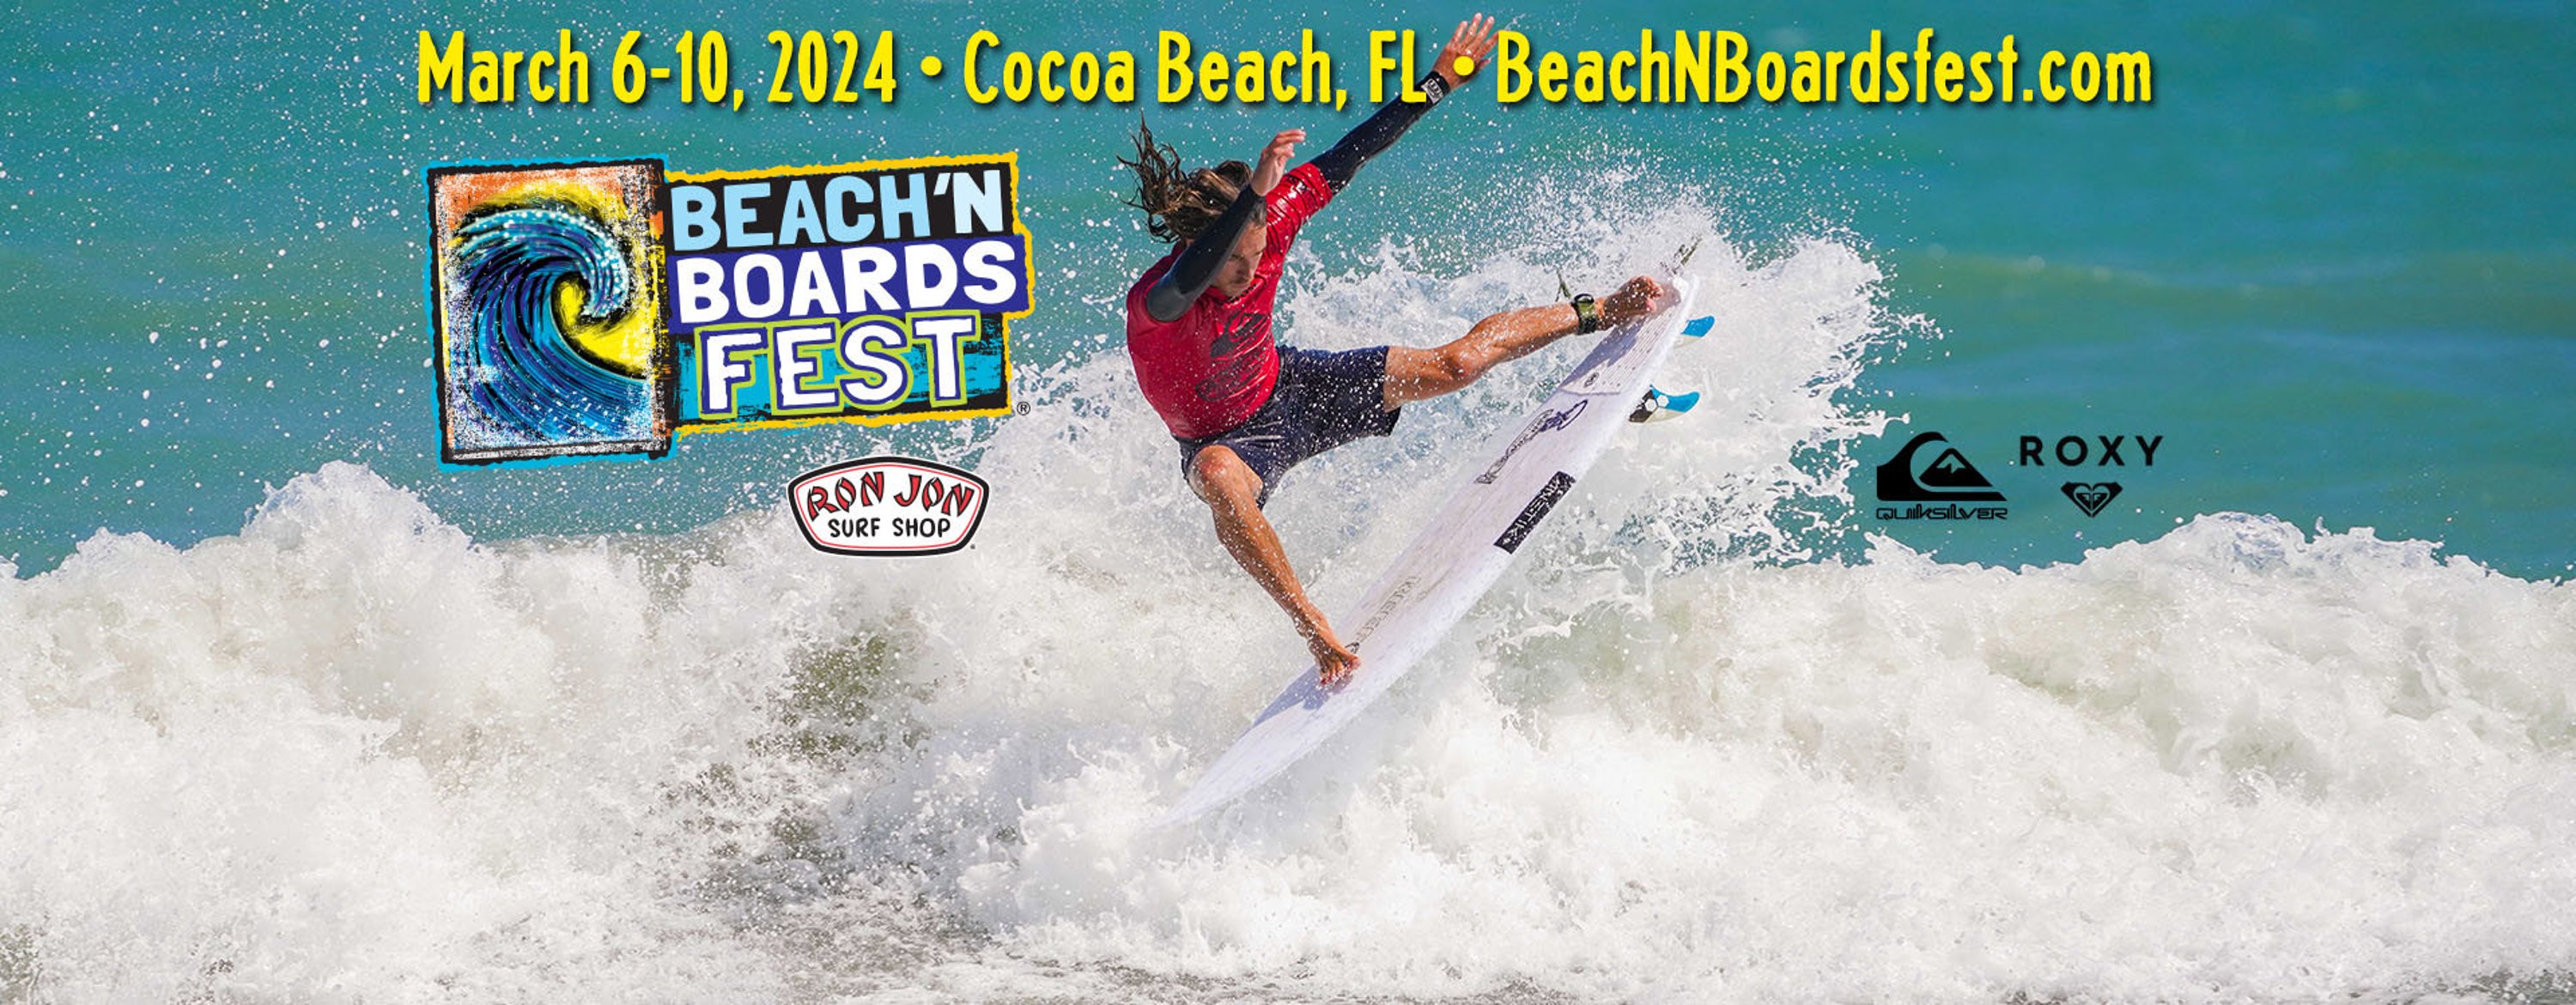 competitive surfer in the wave's white water - text information March 6-10, 2024 Cocoa Beach, FL